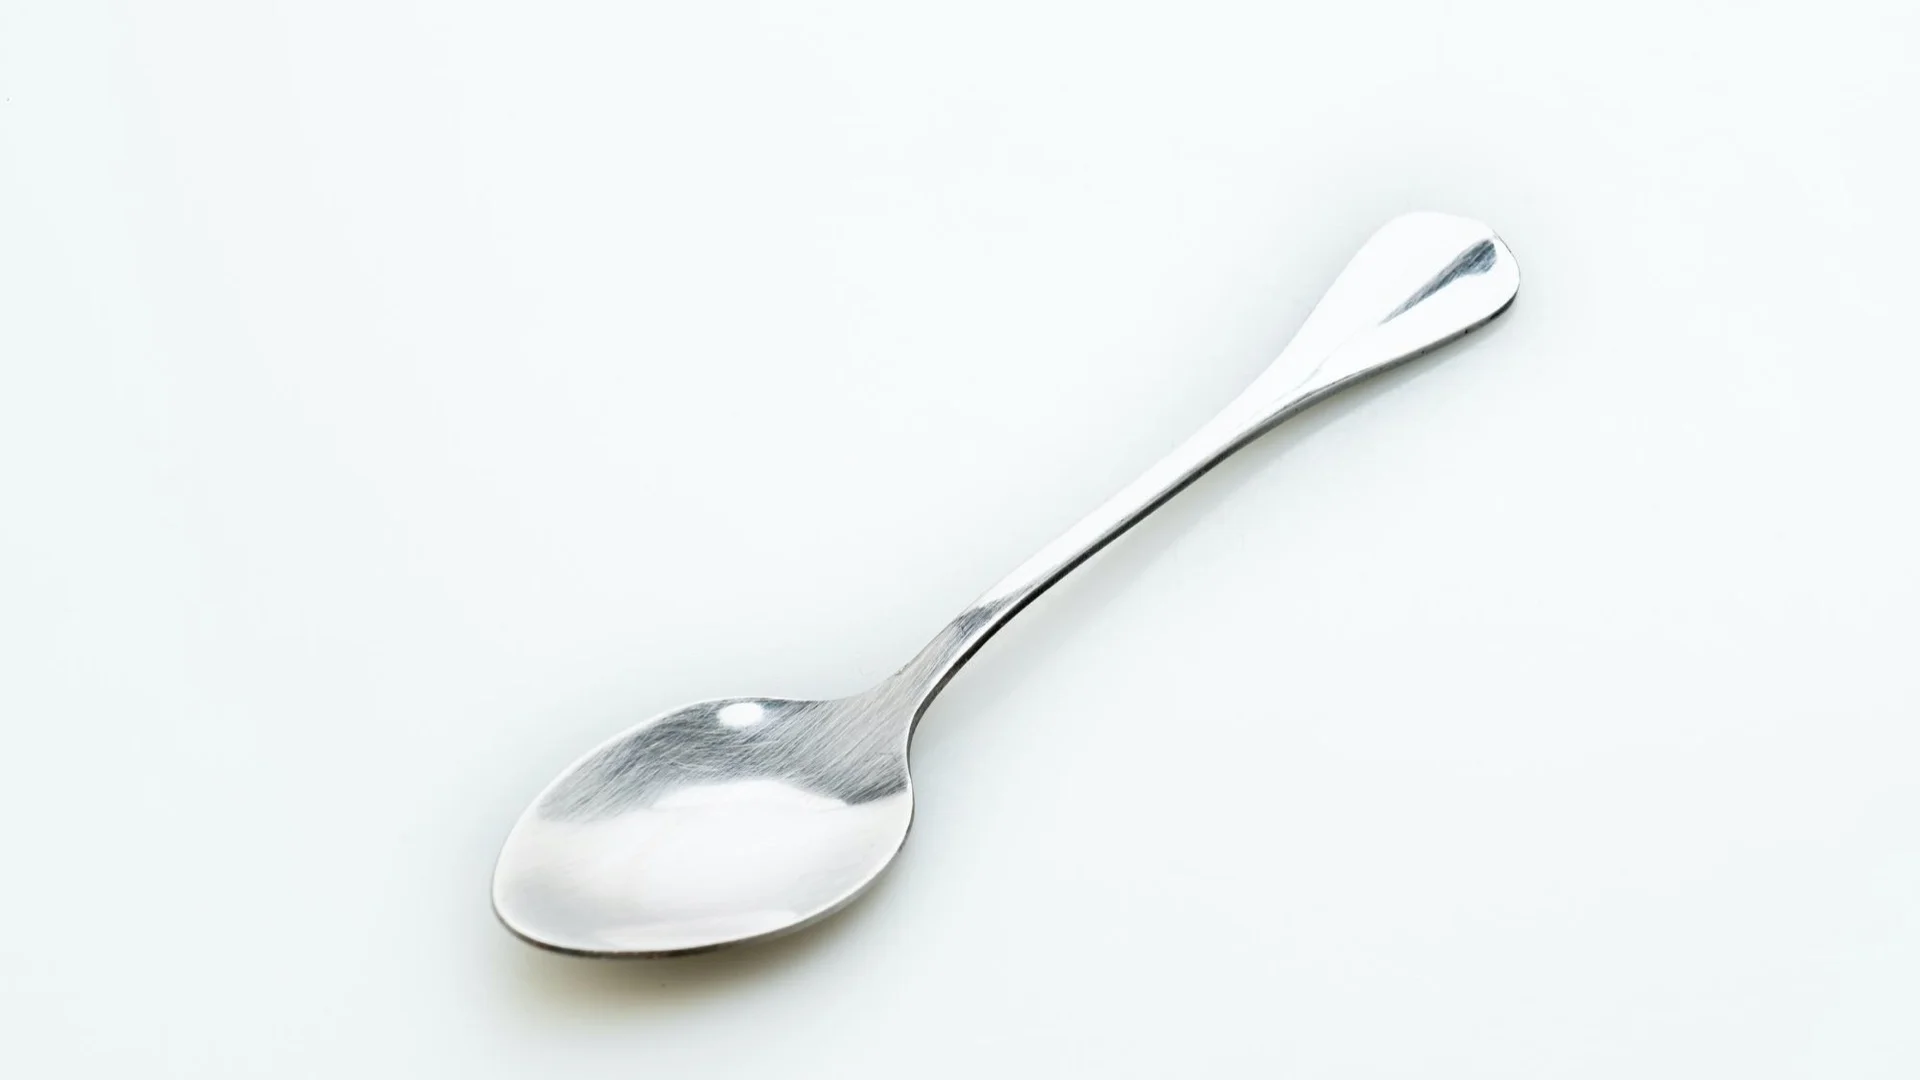 Teaspoon Sizes in the US and UK